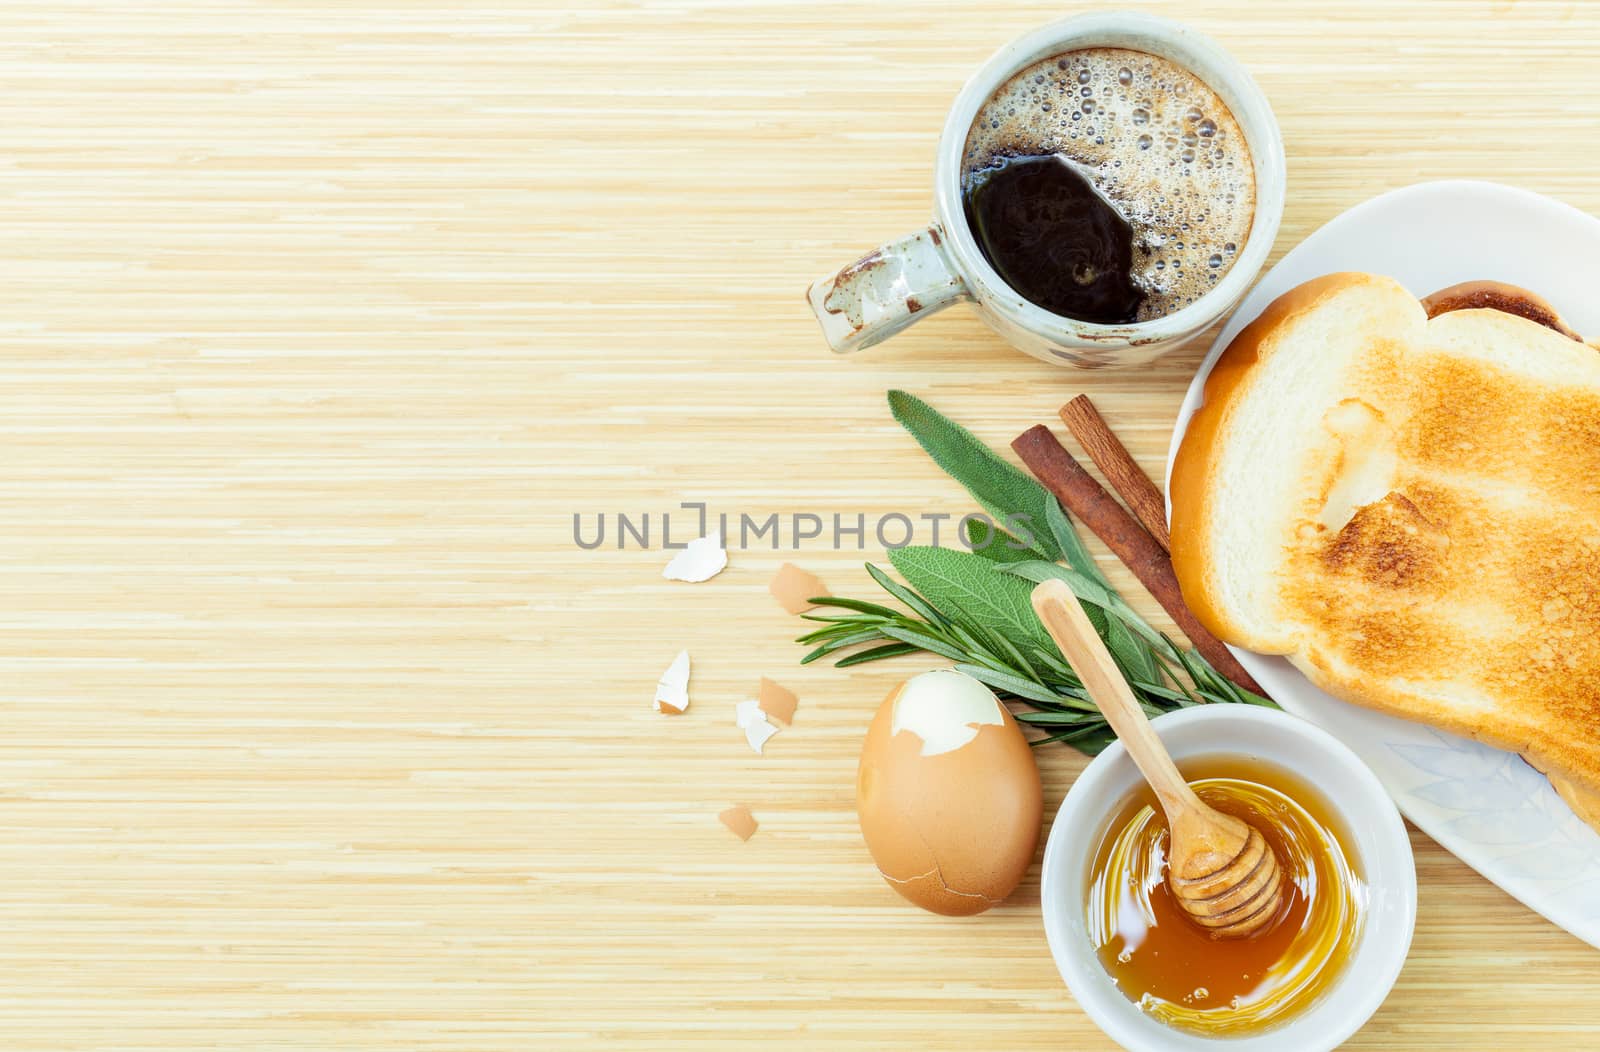 Healthy breakfast  toasts and herb on wooden table with copy space.